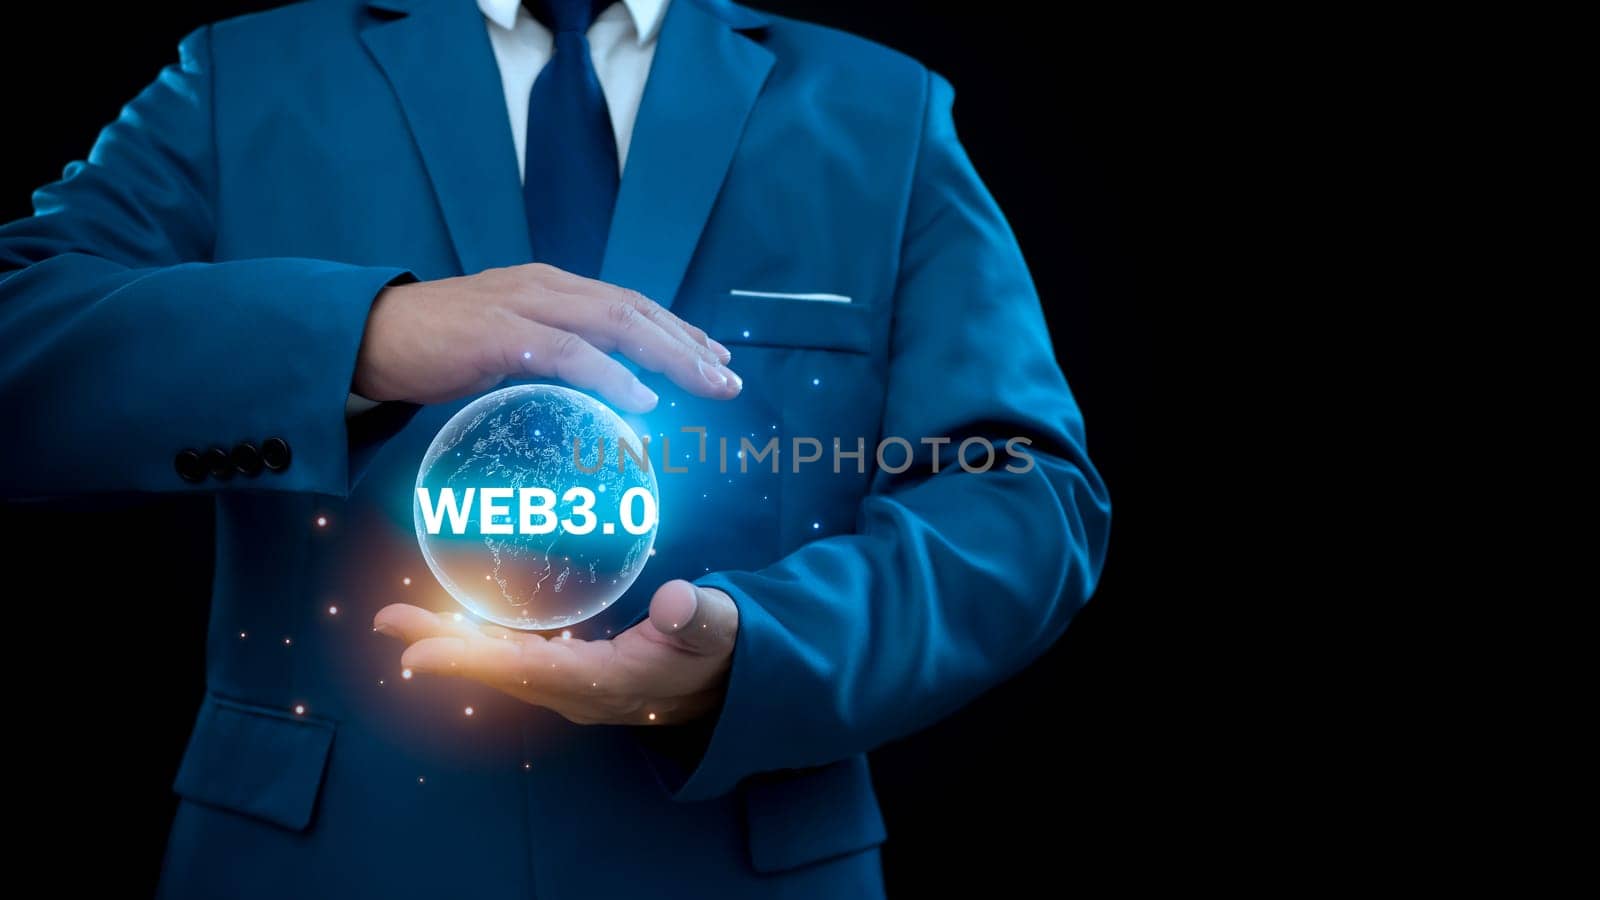 Web 3.0 concept with businessman in suit on black background. Technology and web concept 3.0. Technology global network. website internet development. by Unimages2527